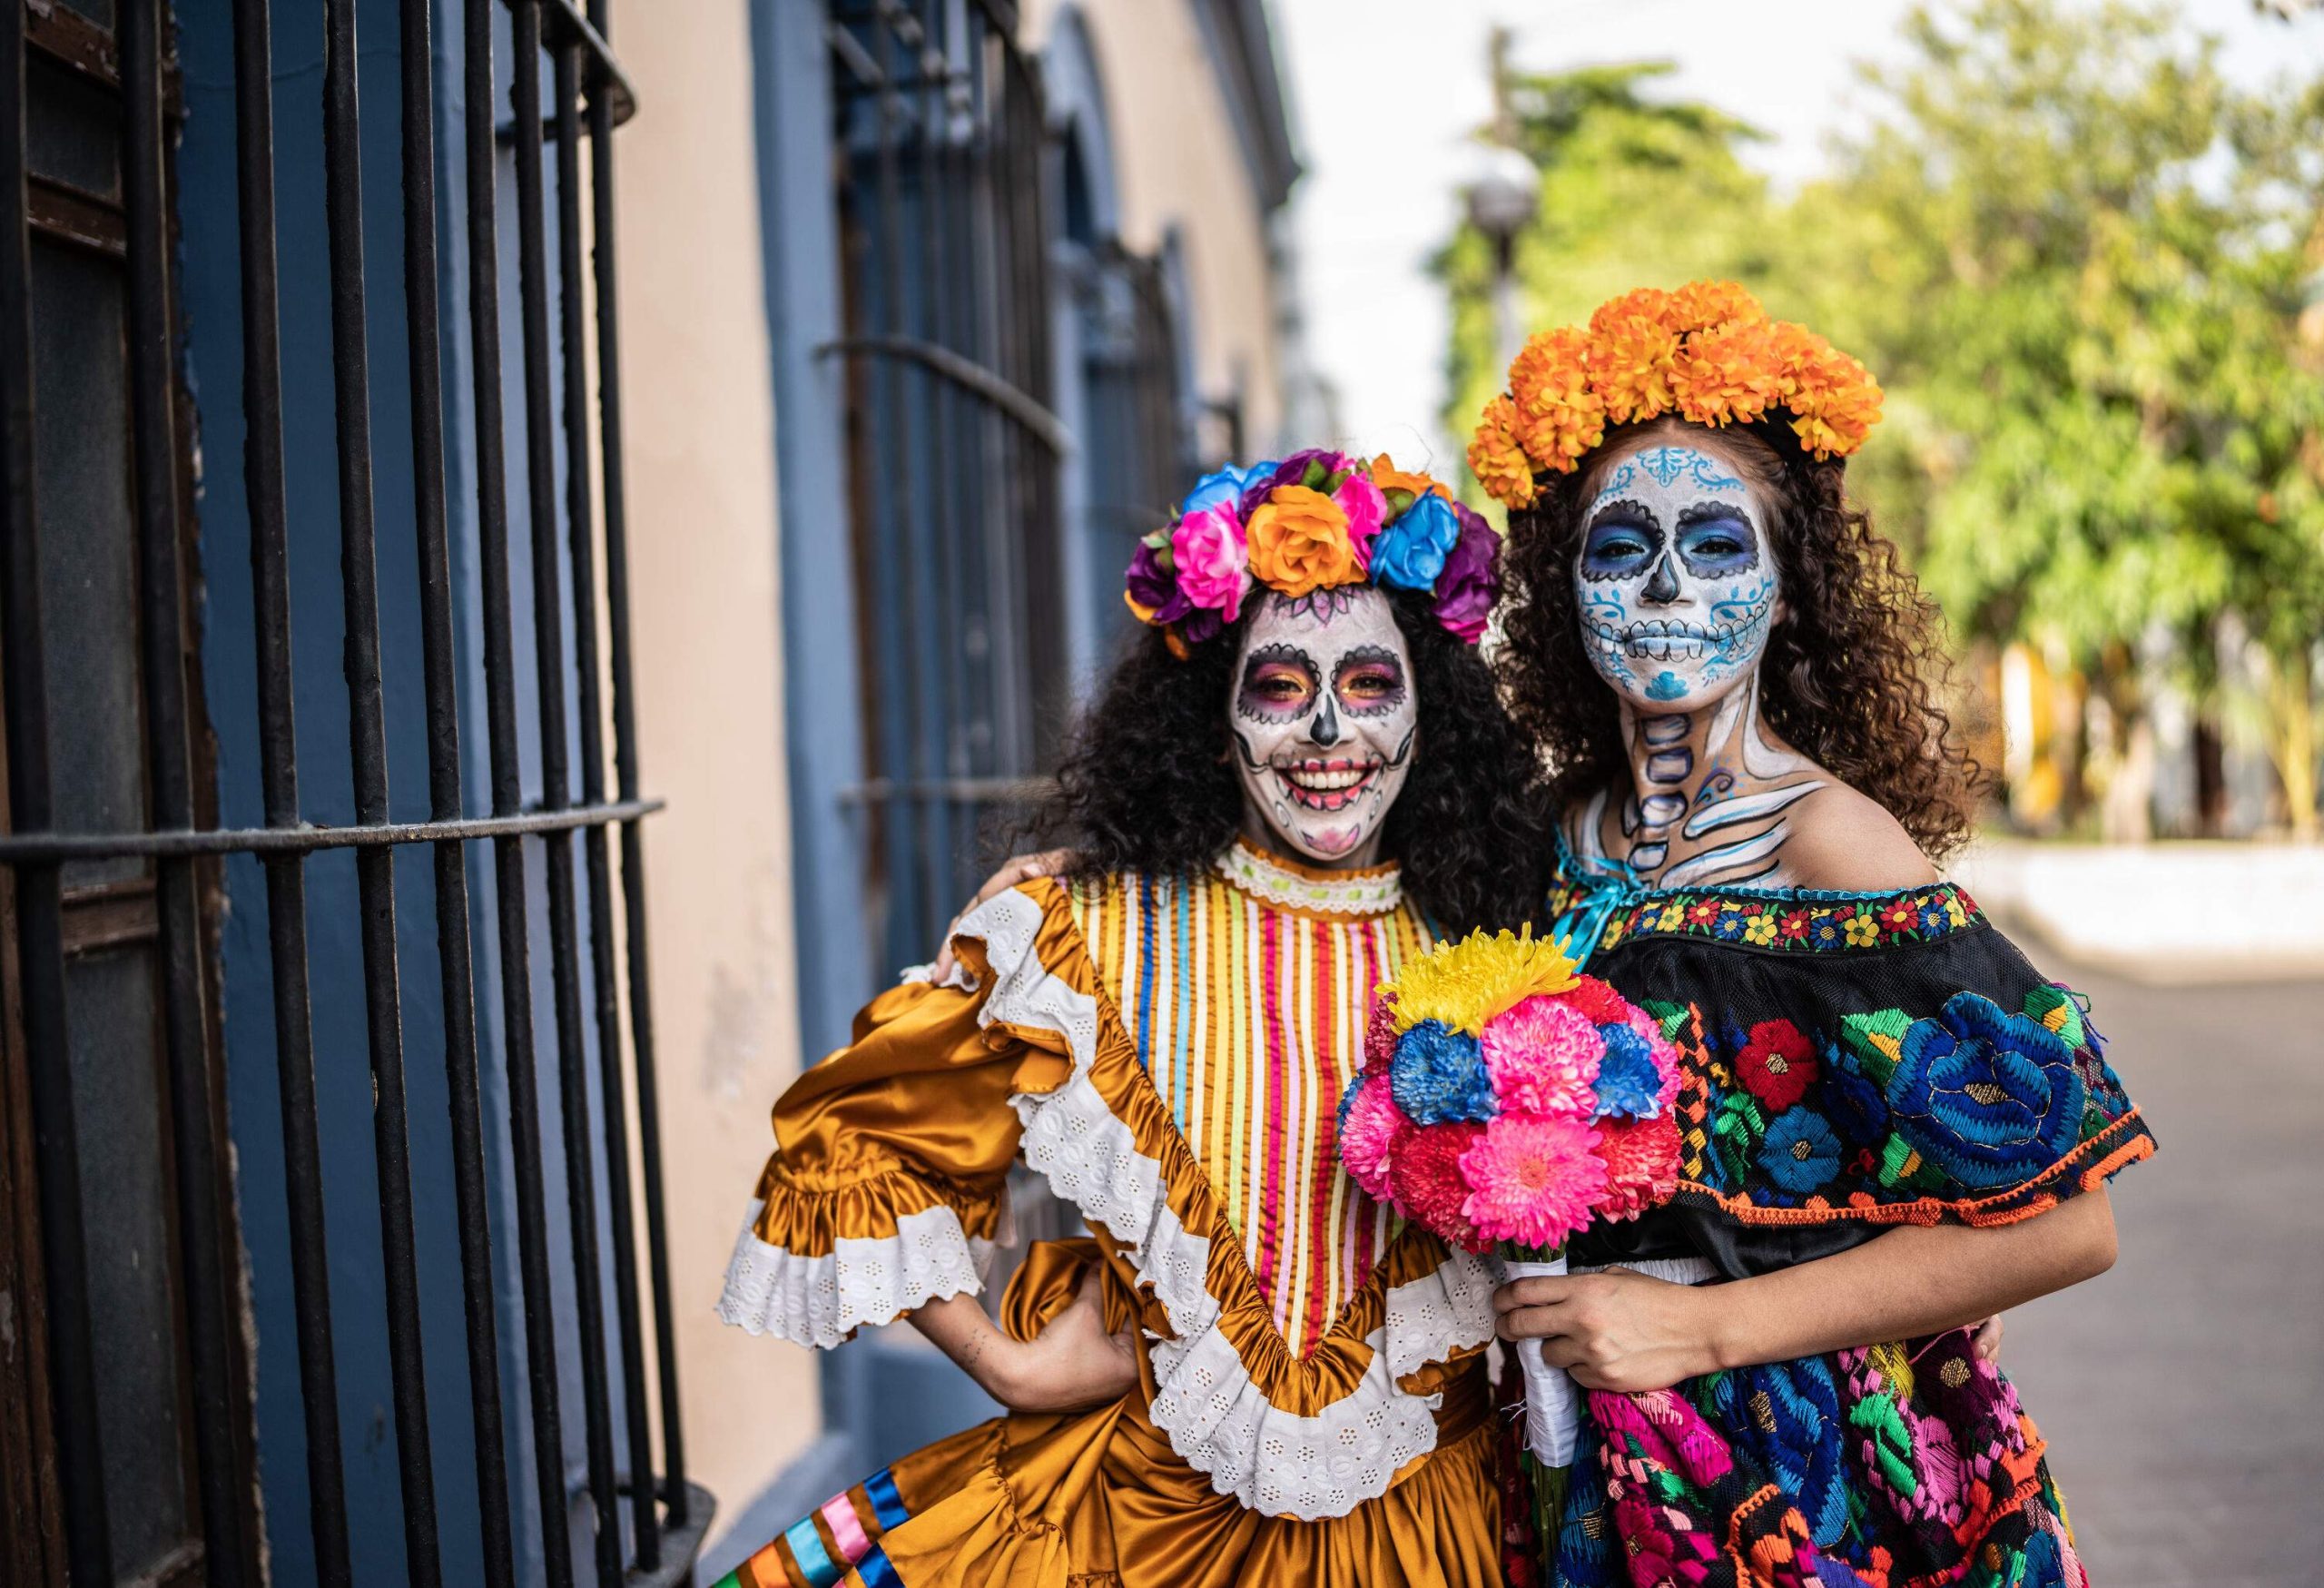 Two individuals in colourful dresses and flower headbands with their faces painted as skulls.